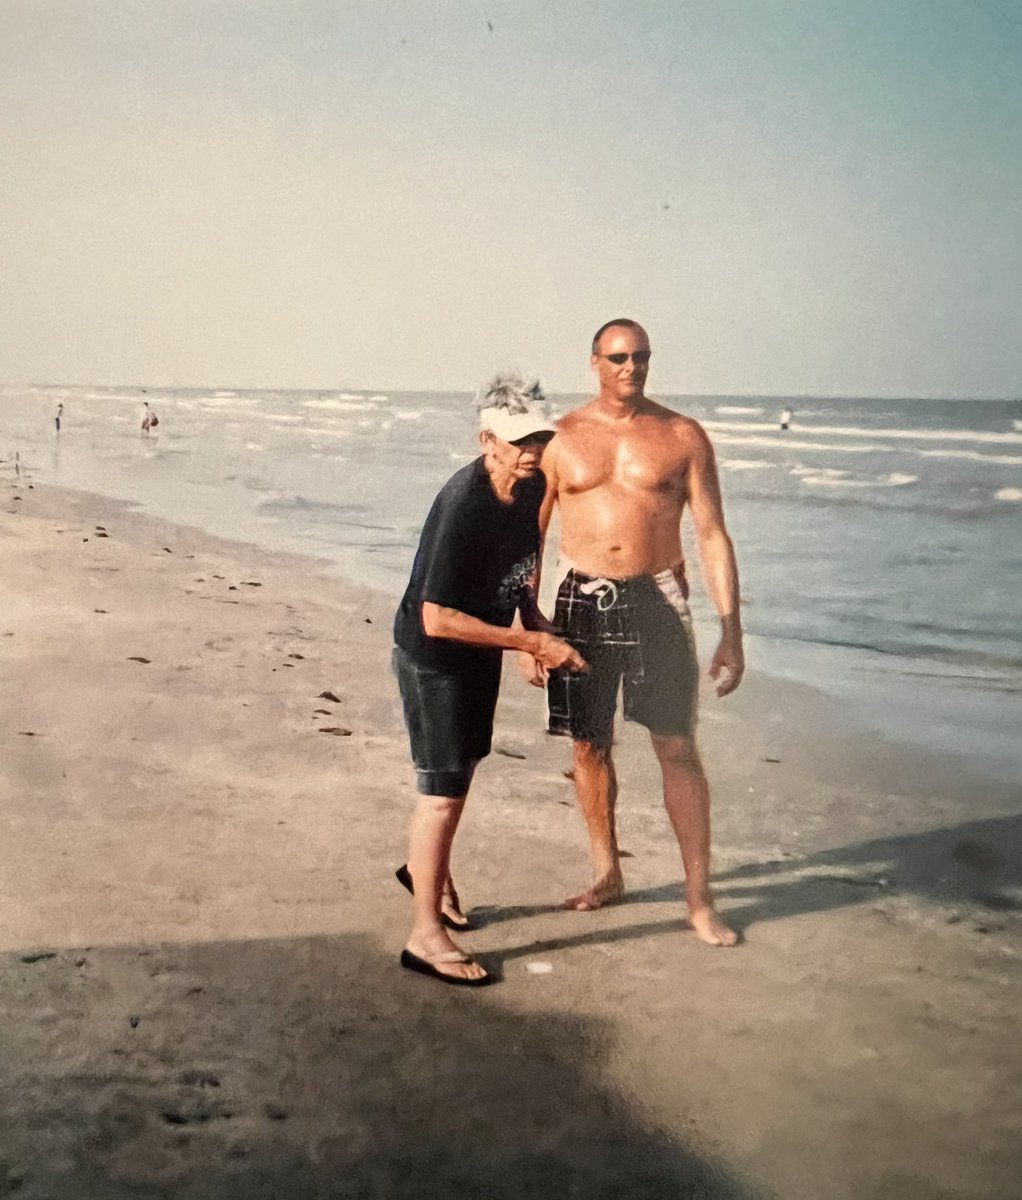 Since X is so filled with politics, transgenders and other crap…thought I would share myself playing Washers with my 86 year old mother on a Texas beach!  #preciousmoments